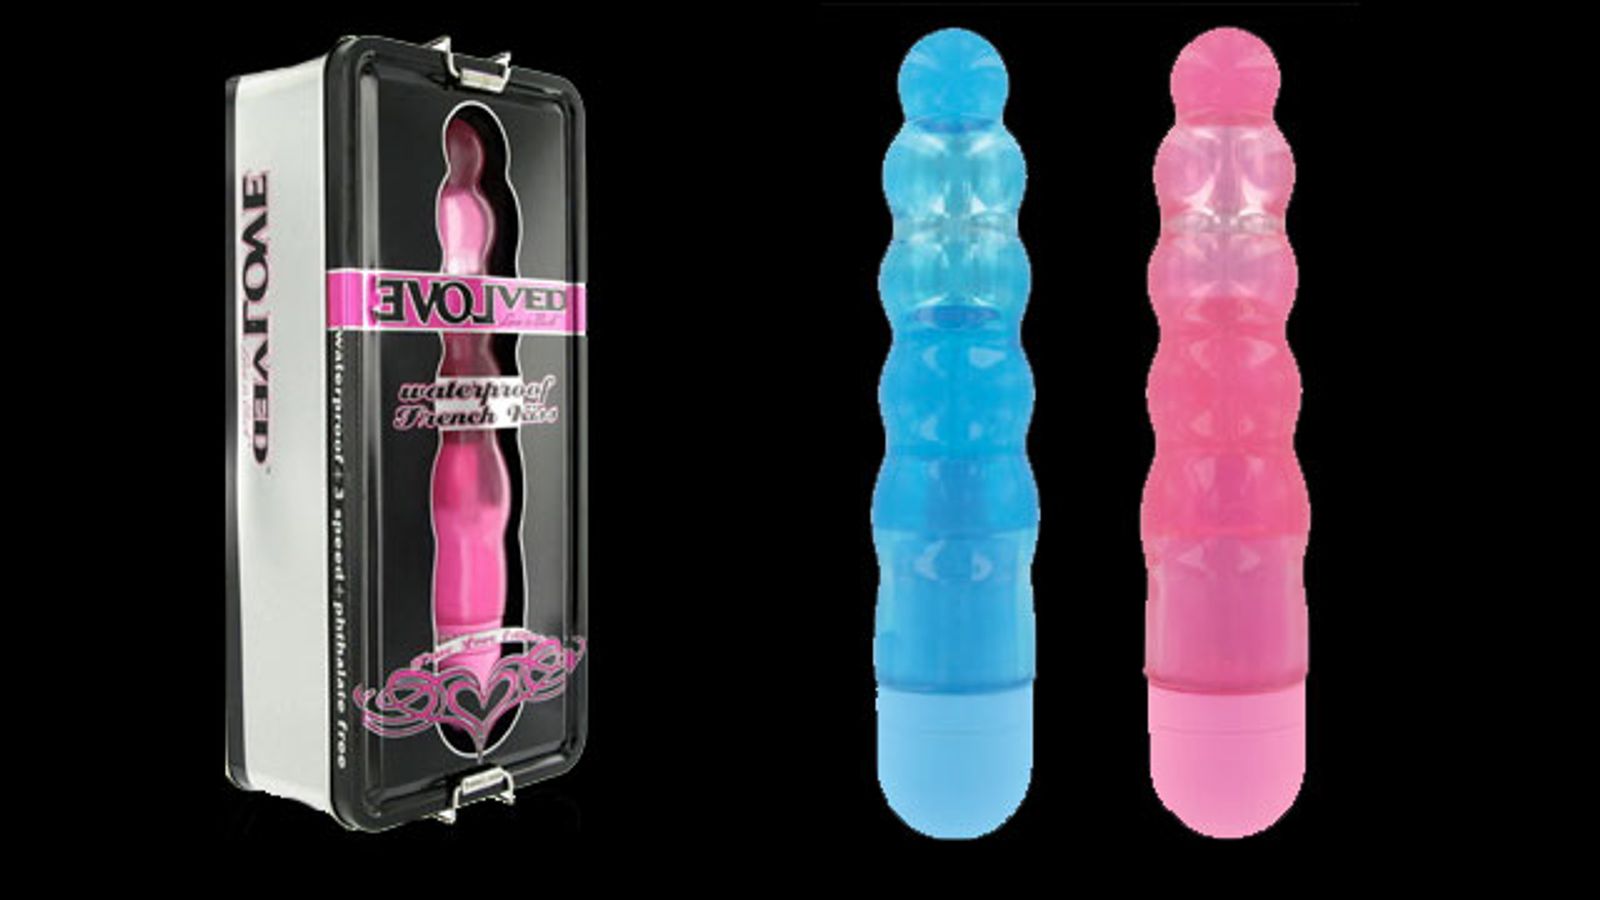 Evolved Novelties Releases New Products